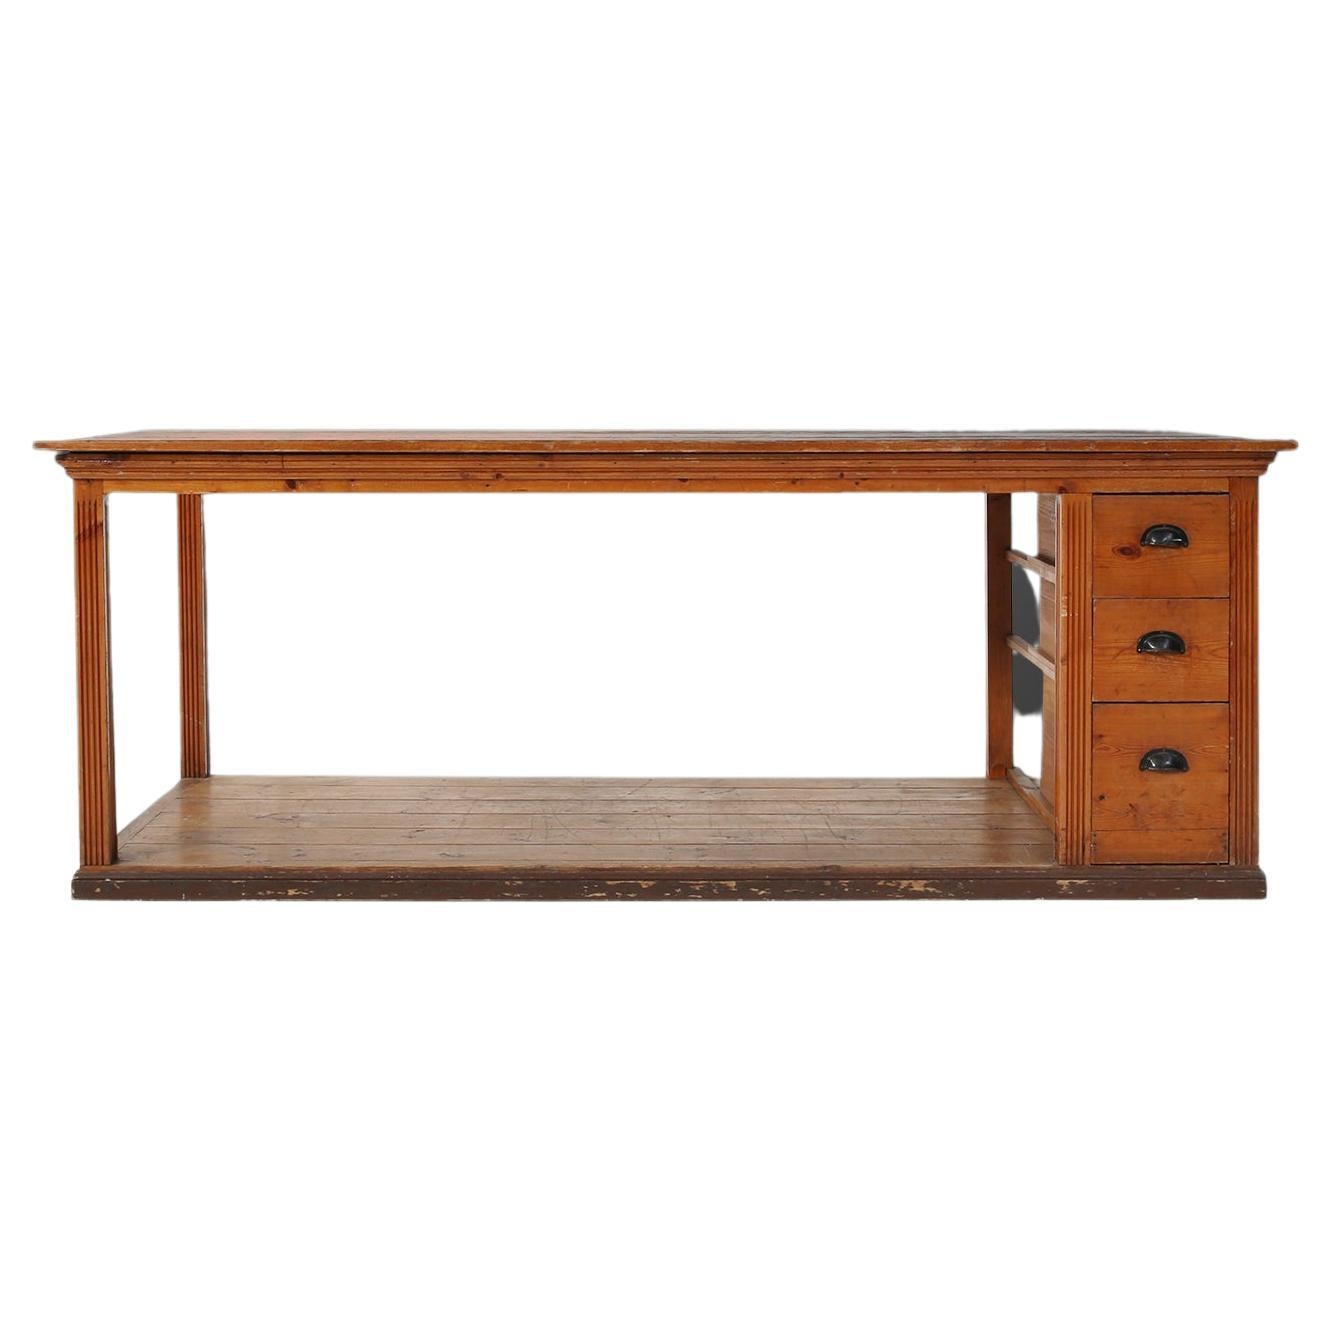 French working table in pine wood made around 1920. A large wooden table with great patina on the wood. The sturdy frame is finished with a practical bottom shelf and three drawers on the right side for a perfect storage space.

These tables were